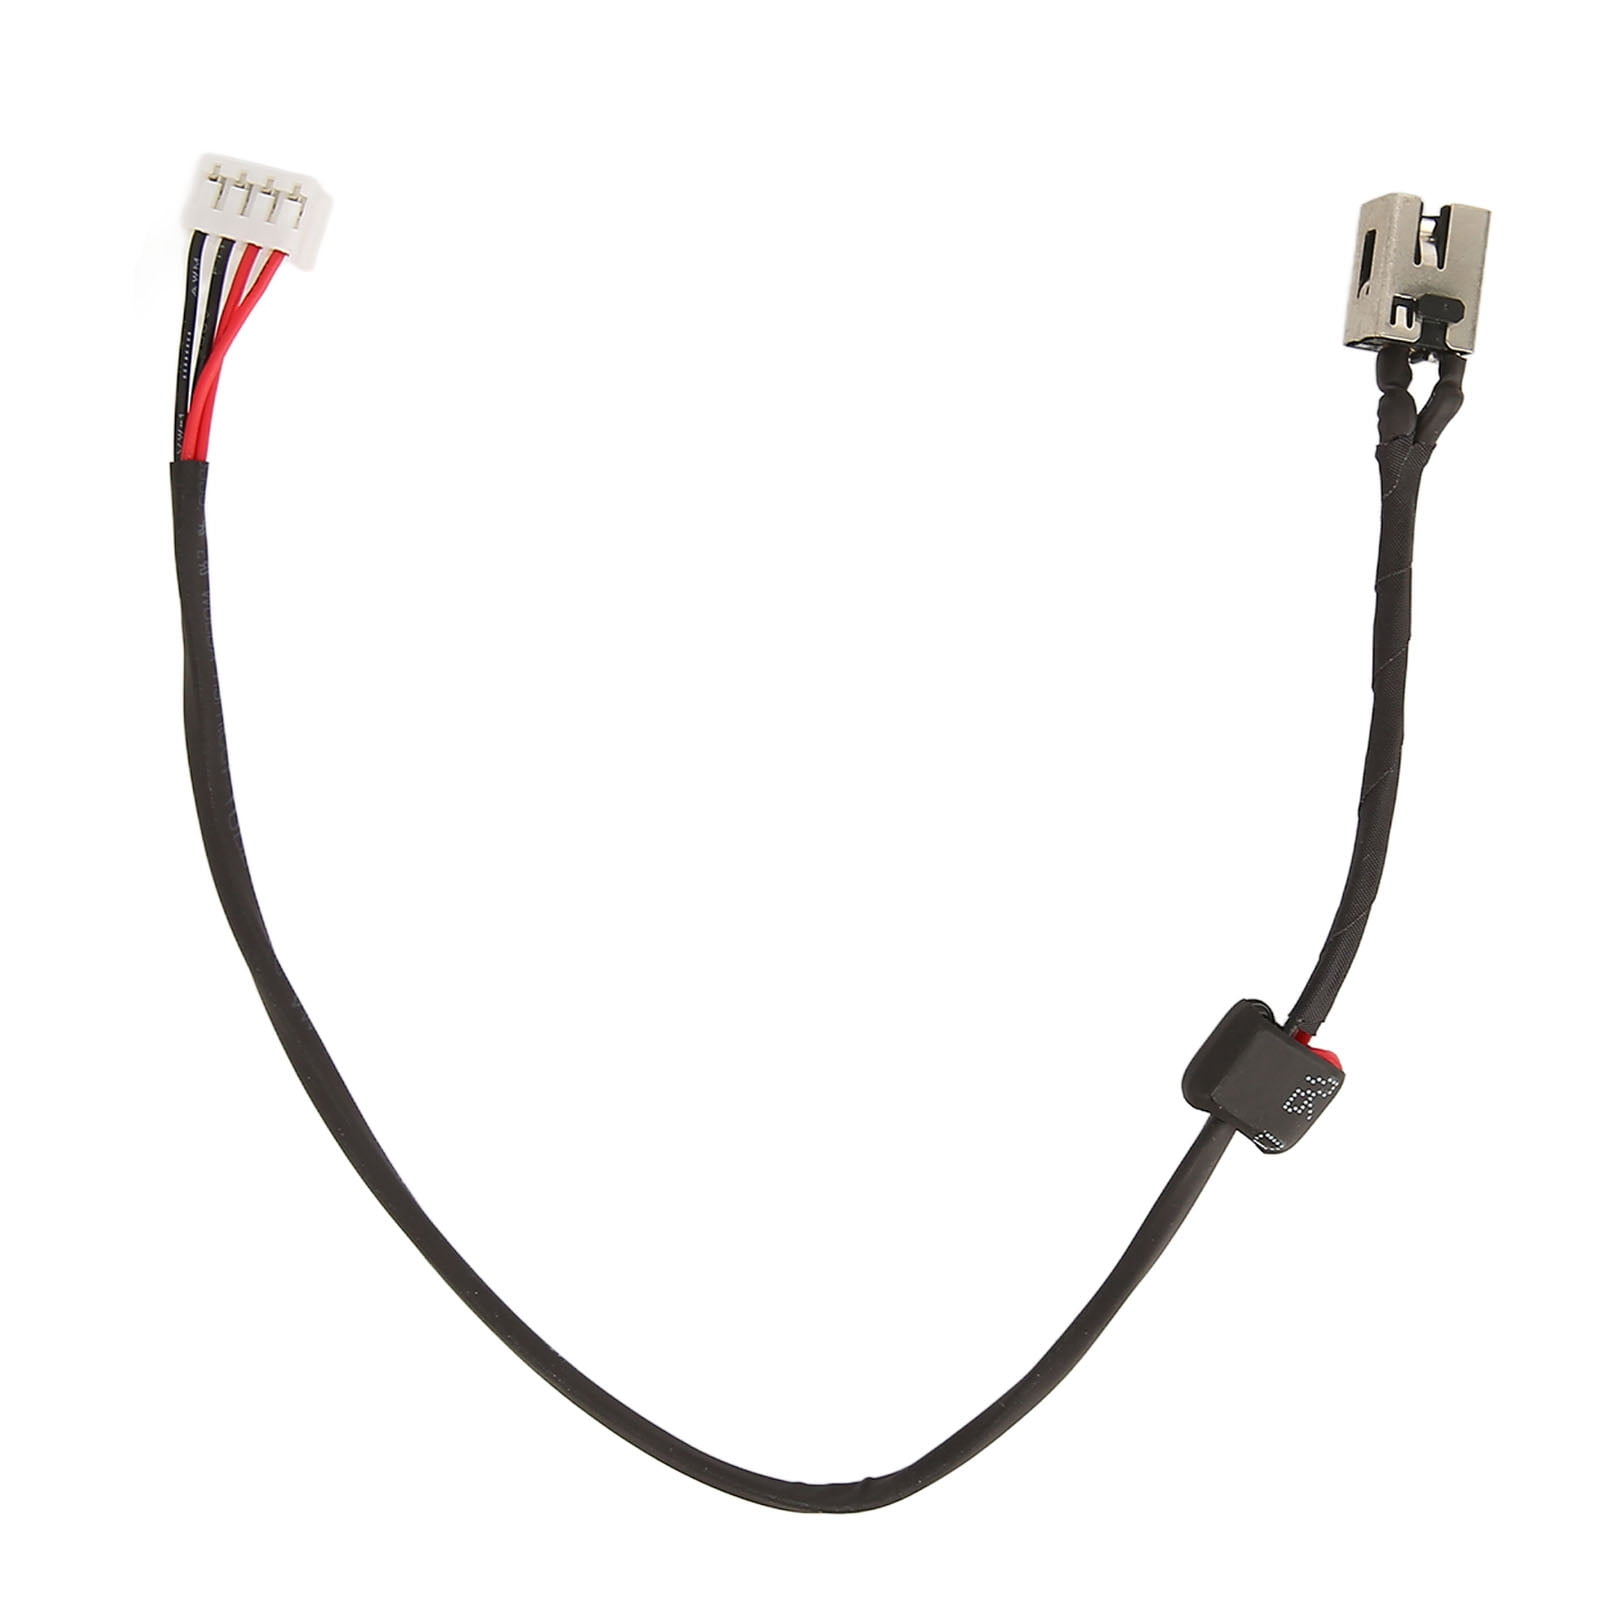 Original DC power jack in cable for LENOVO IDEAPAD G570 G575 SERIES  DC30100EE00 